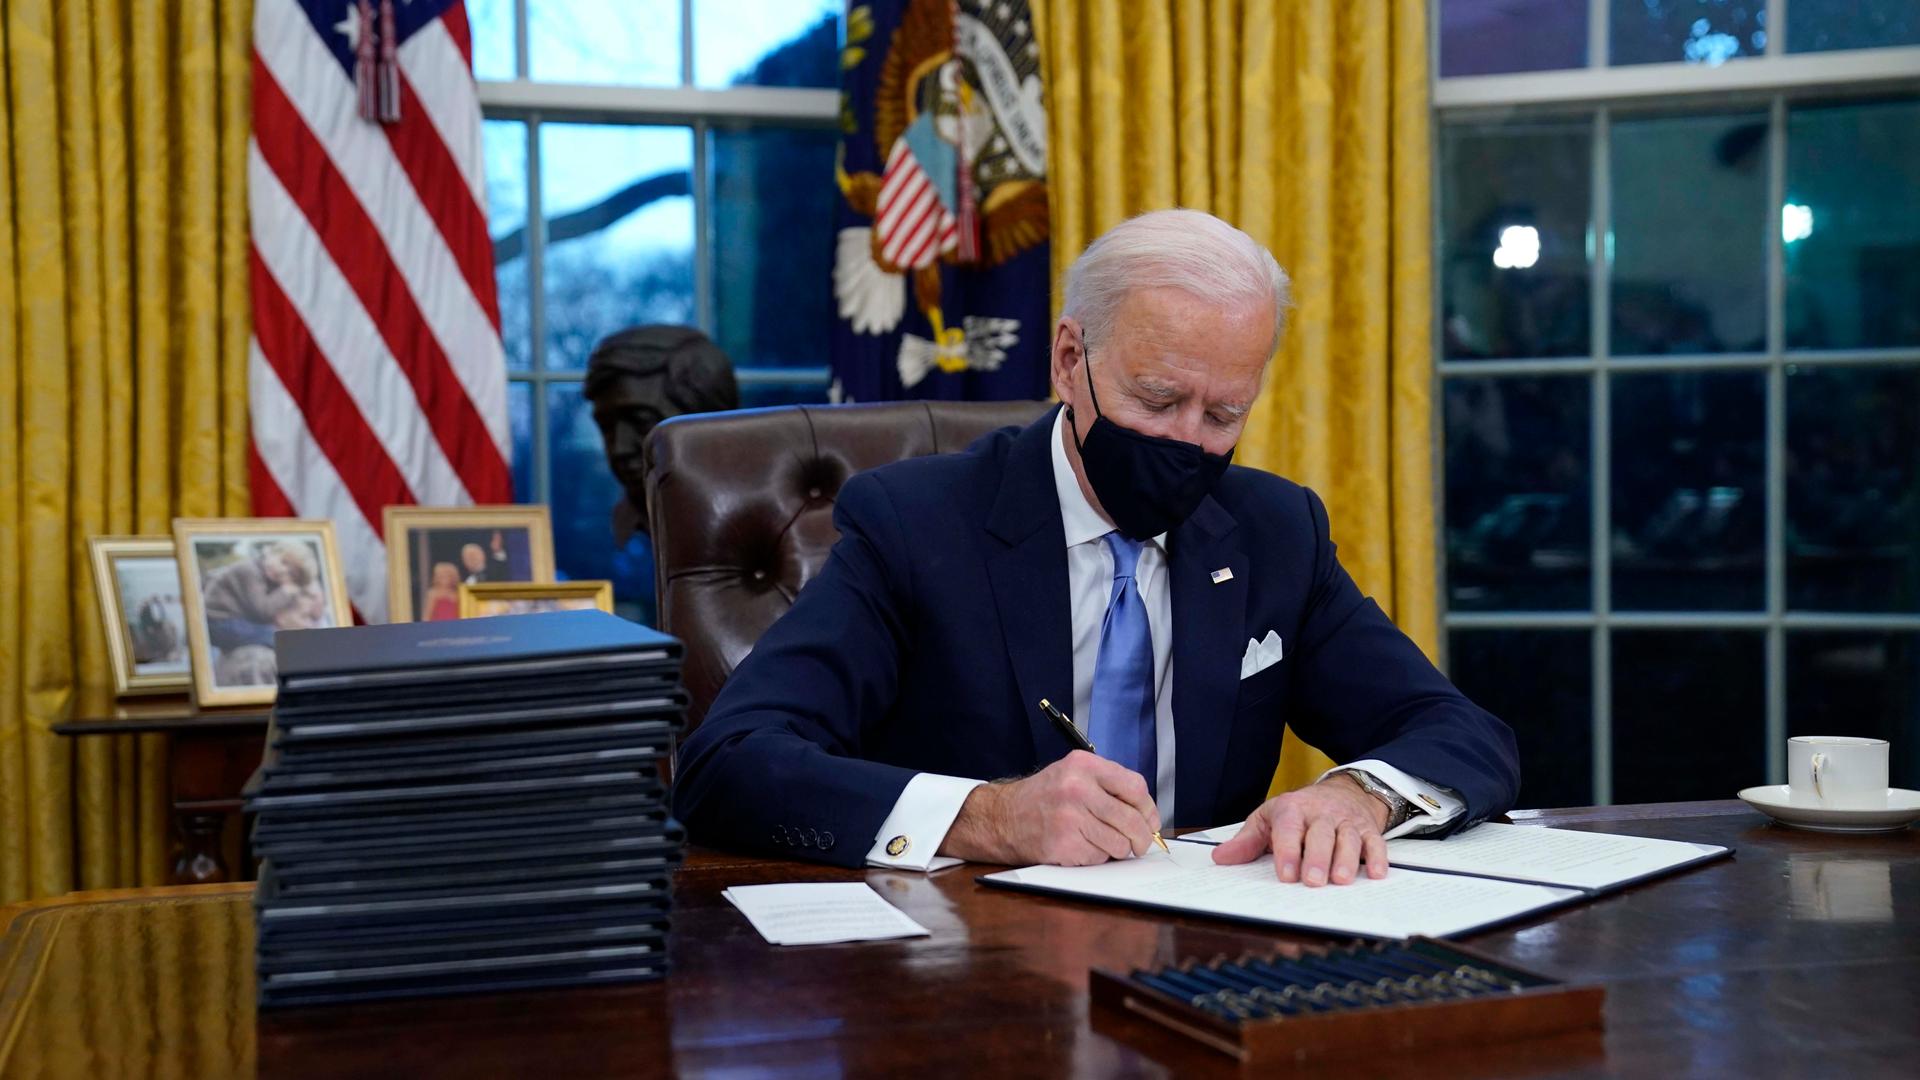 President Joe Biden signs his first executive order in the Oval Office of the White House on Jan. 20, 2021, in Washington, DC.